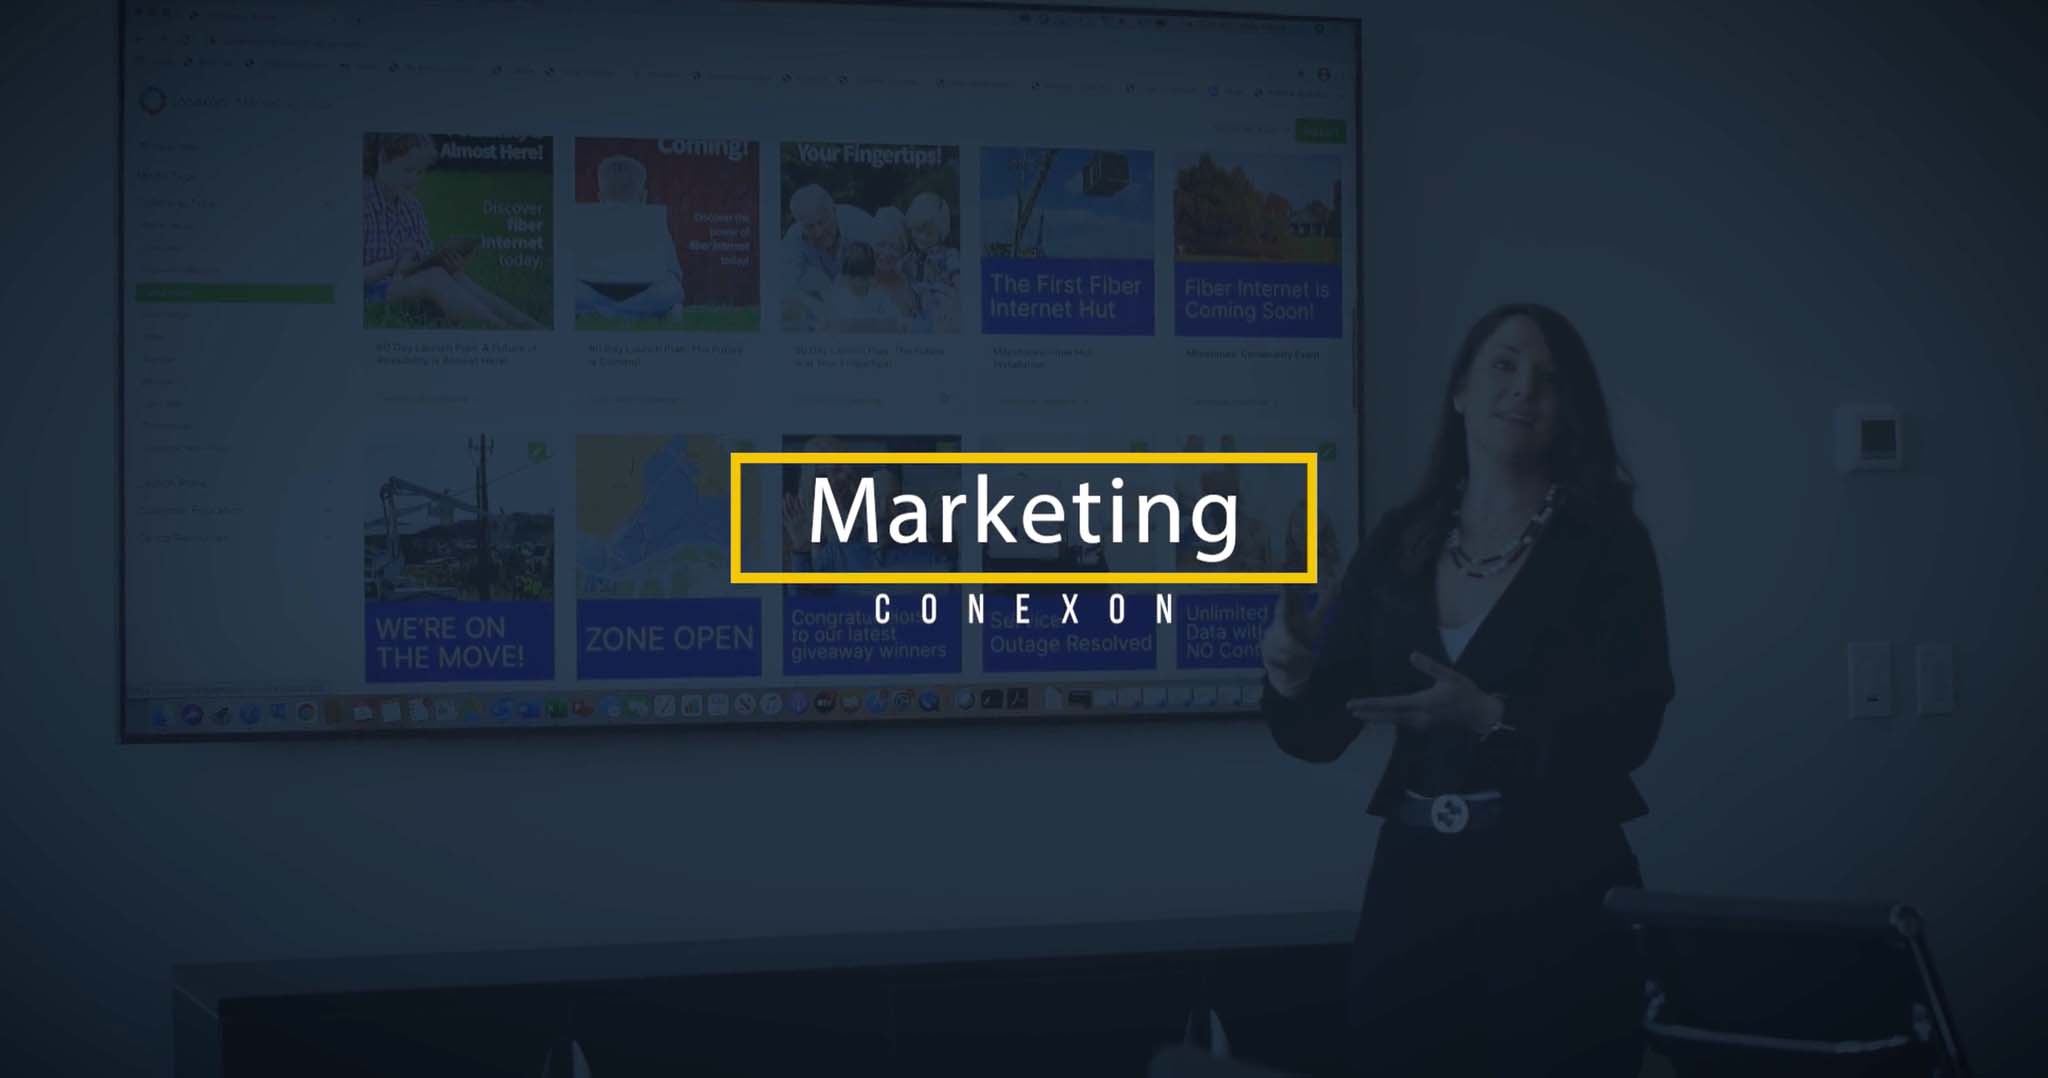 A woman stands next to a projector giving a presentation with a blue overlay overtop of picture with text that says, "Marketing"